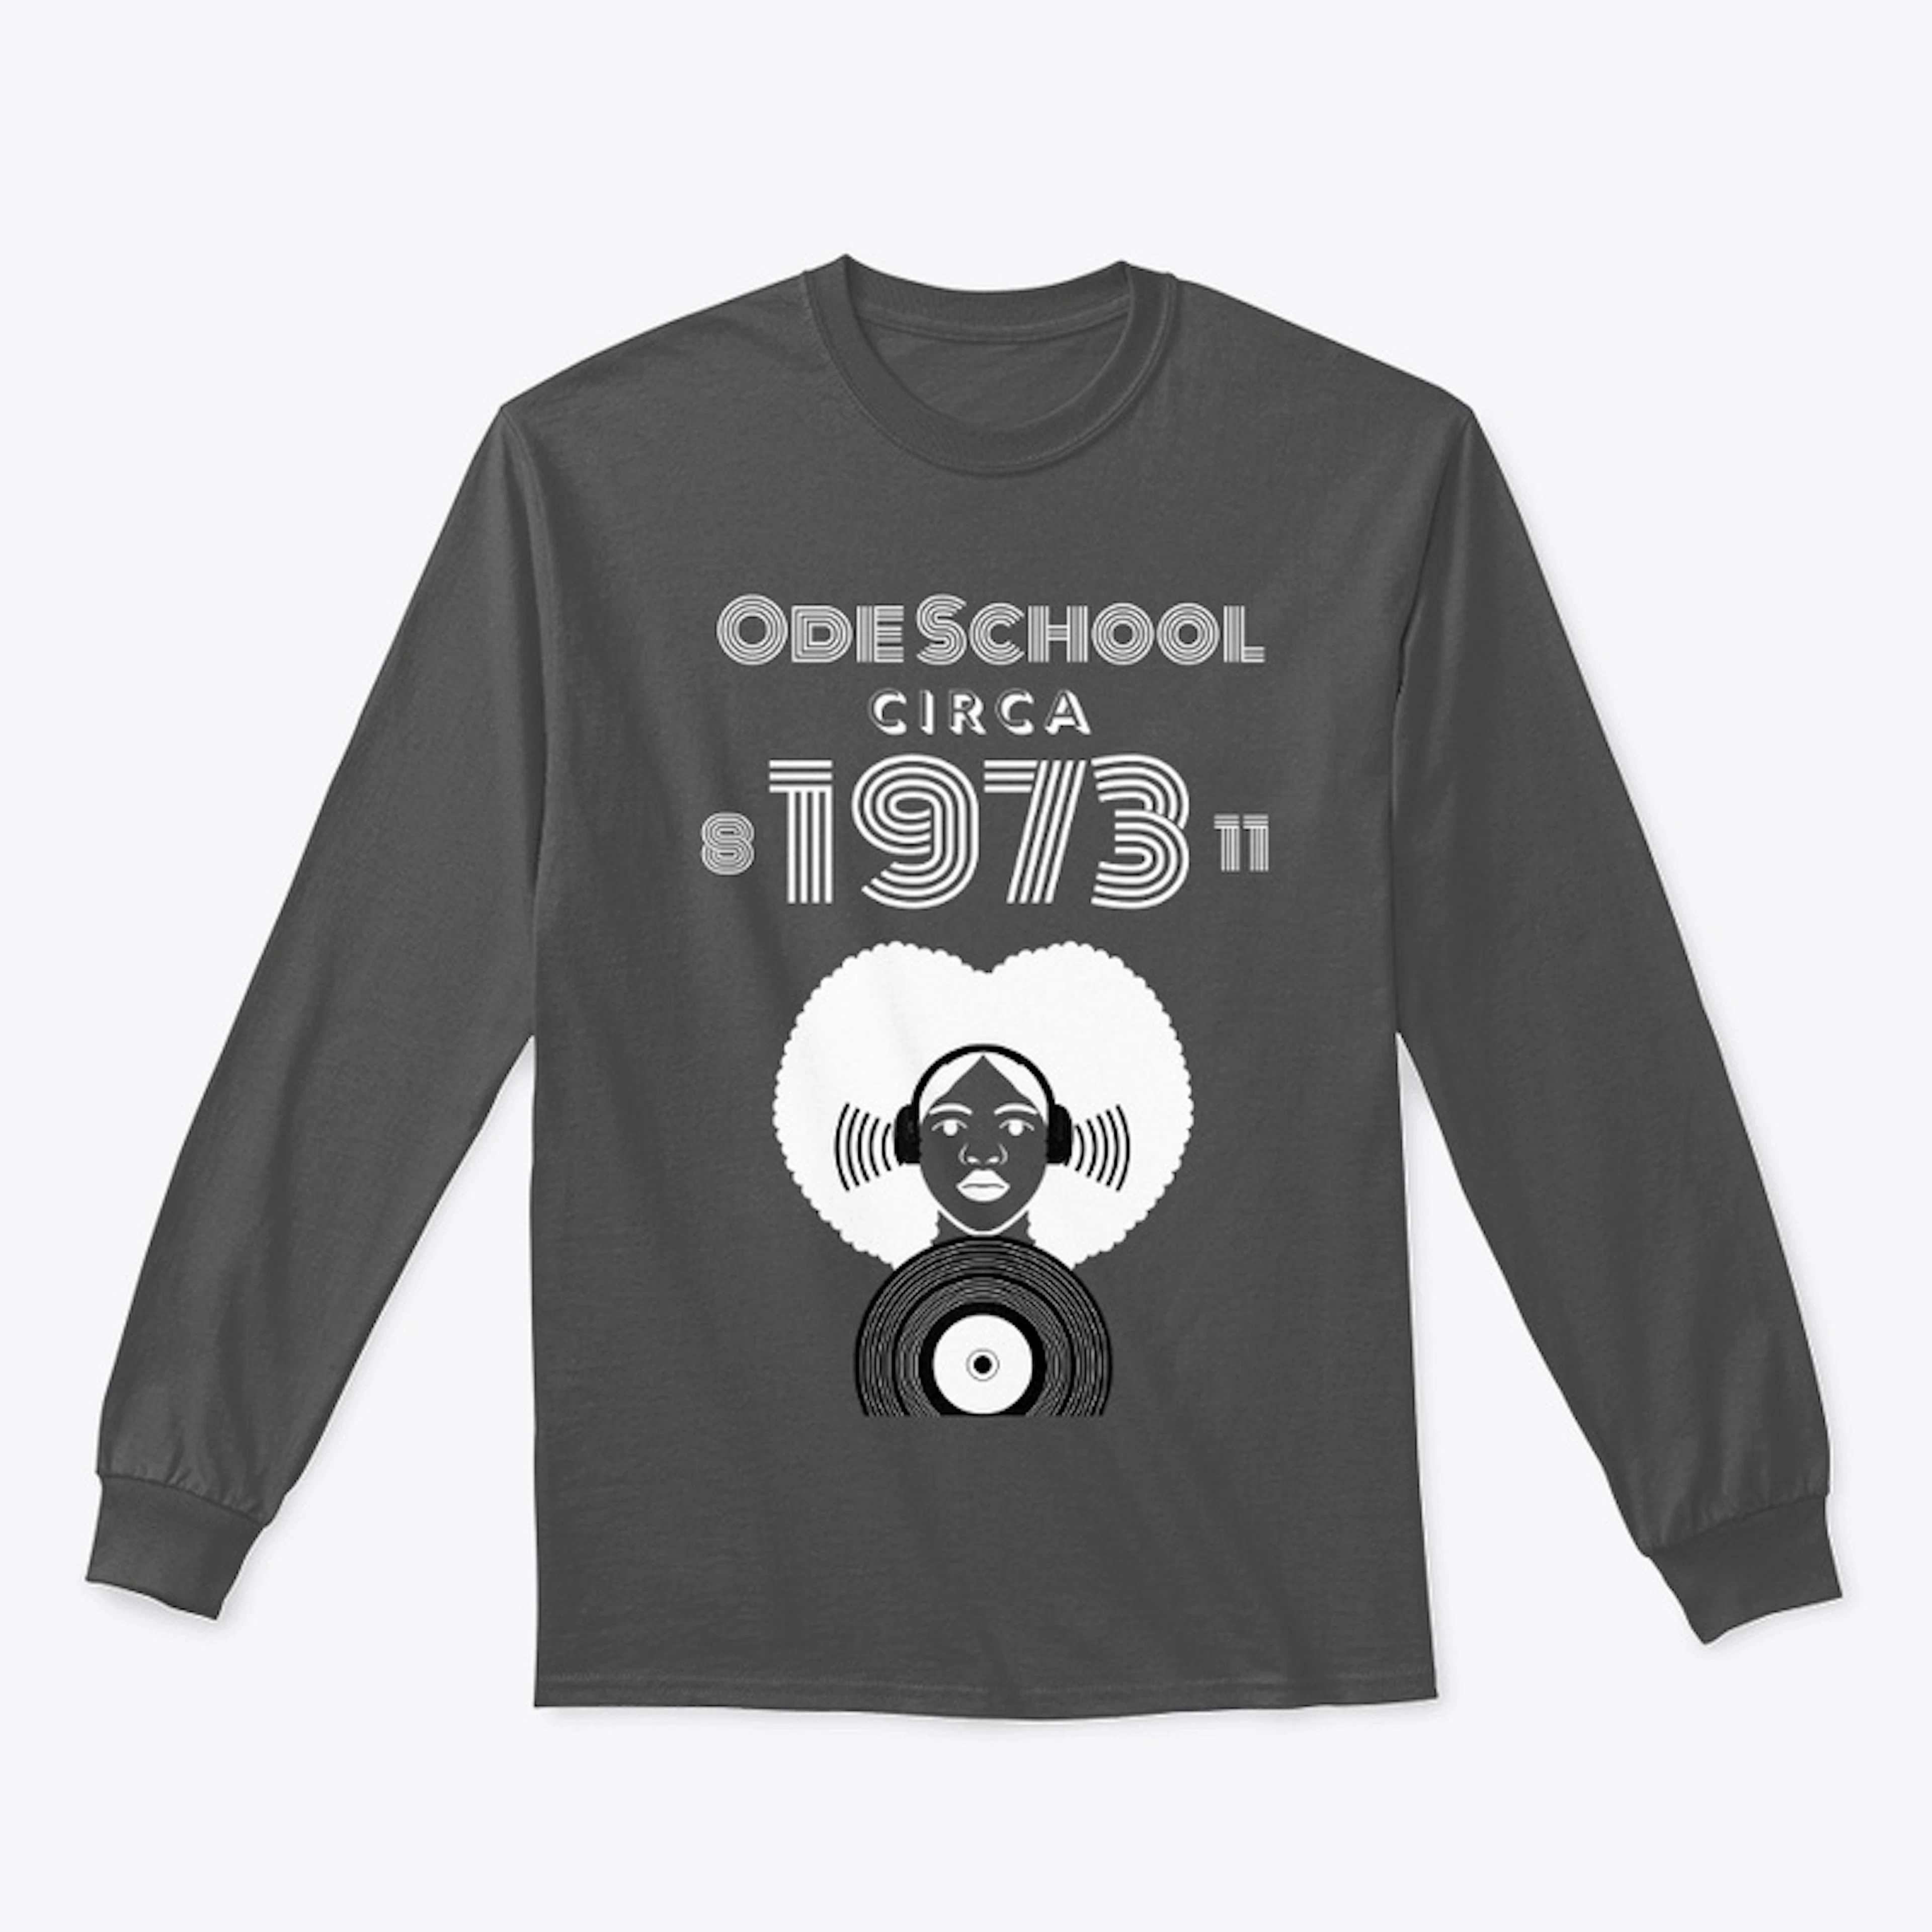 New Ode School Collection -For the Love